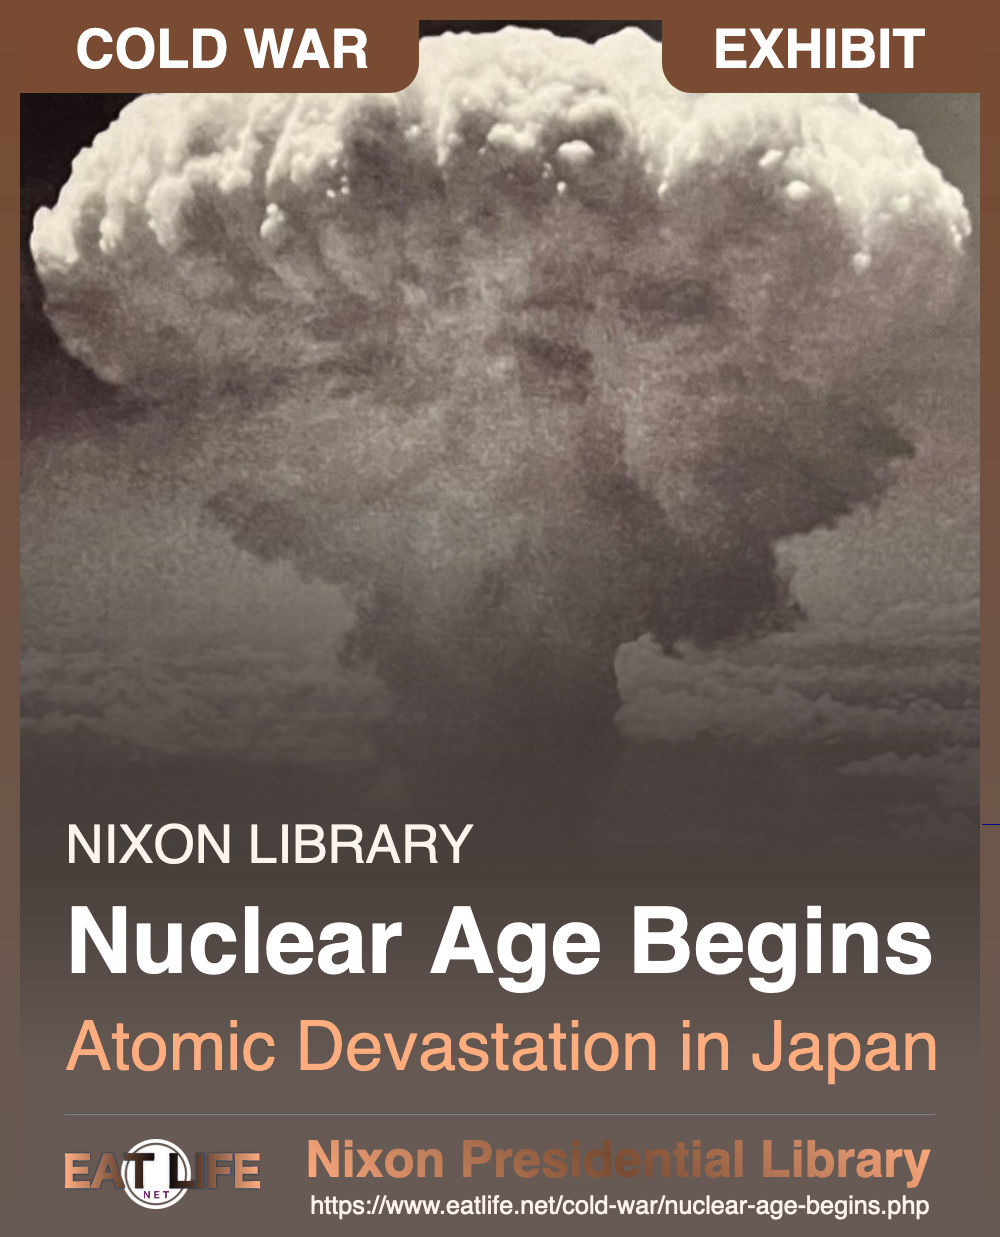 The Nuclear Age Begins